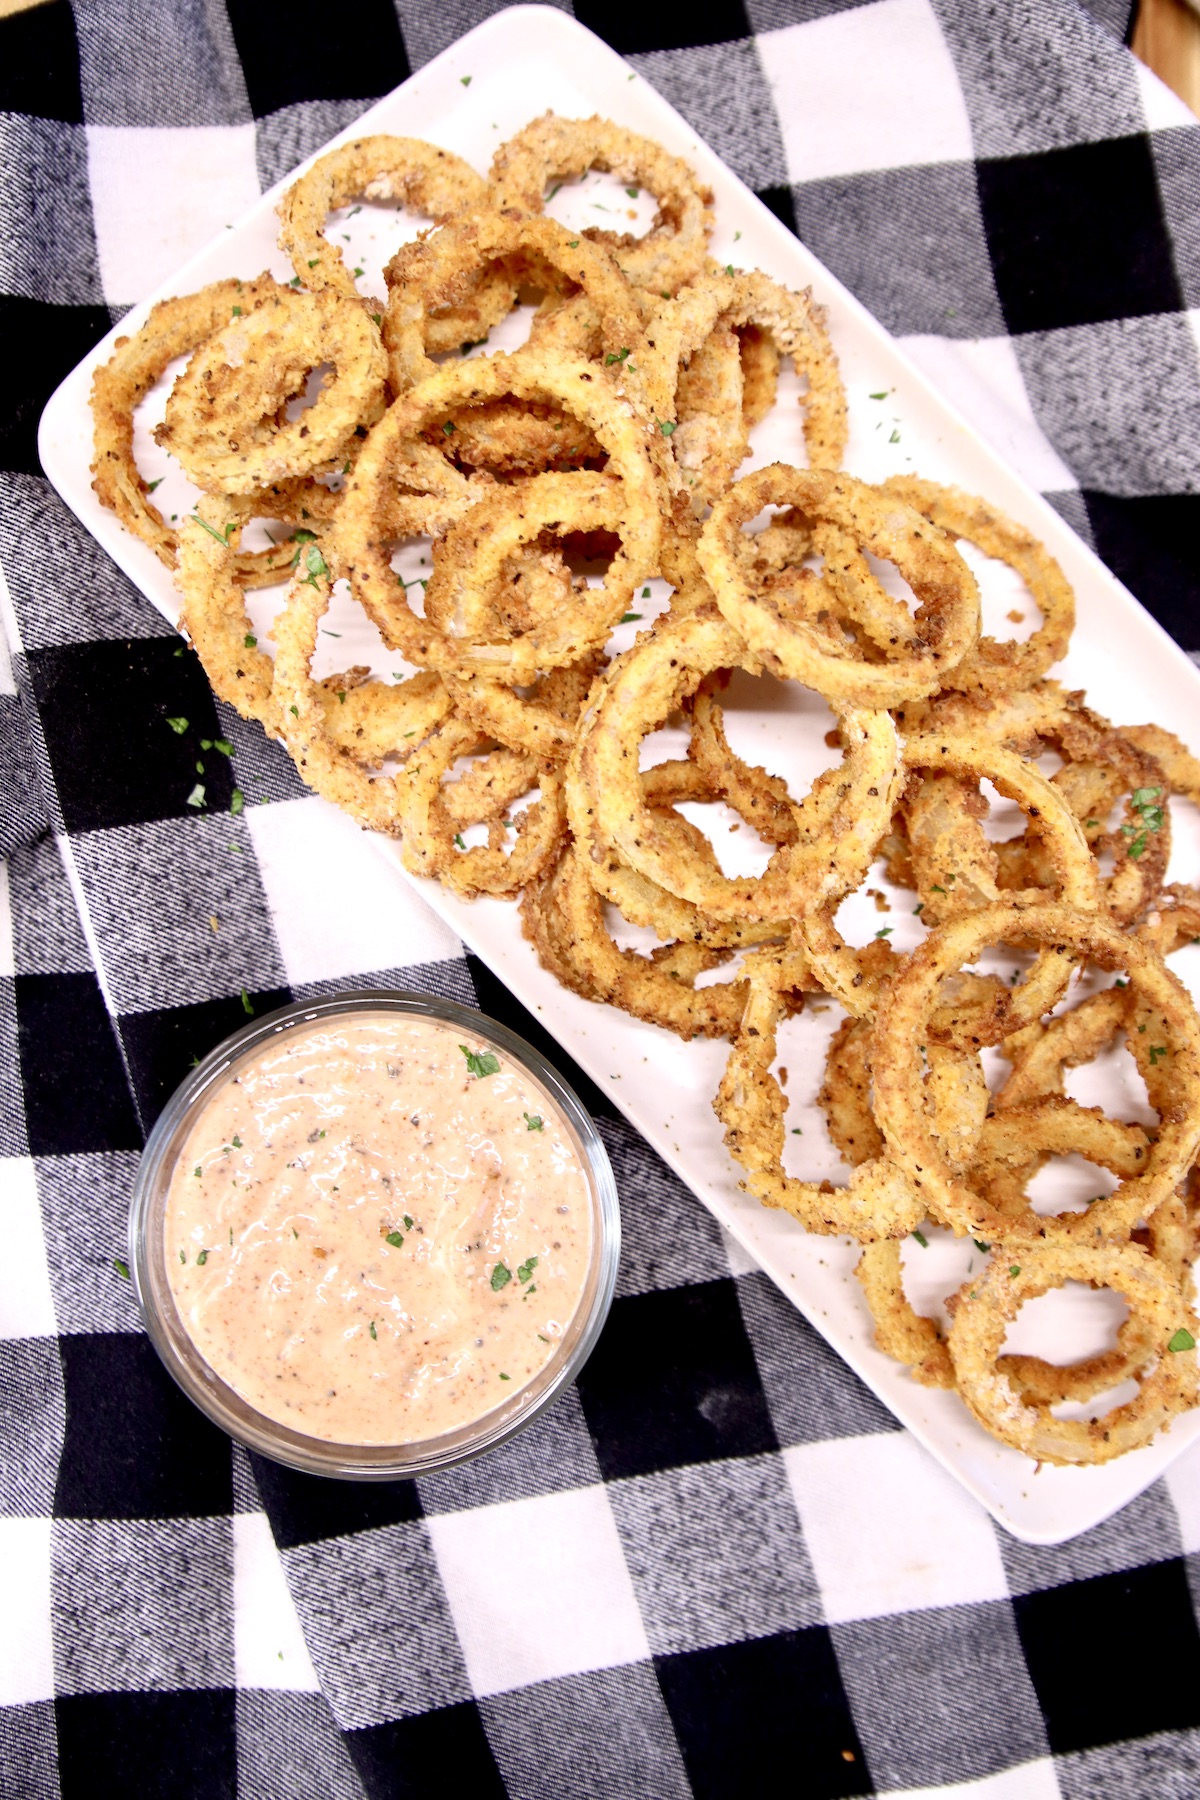 Outback's Blooming Onion and Dipping Sauce 